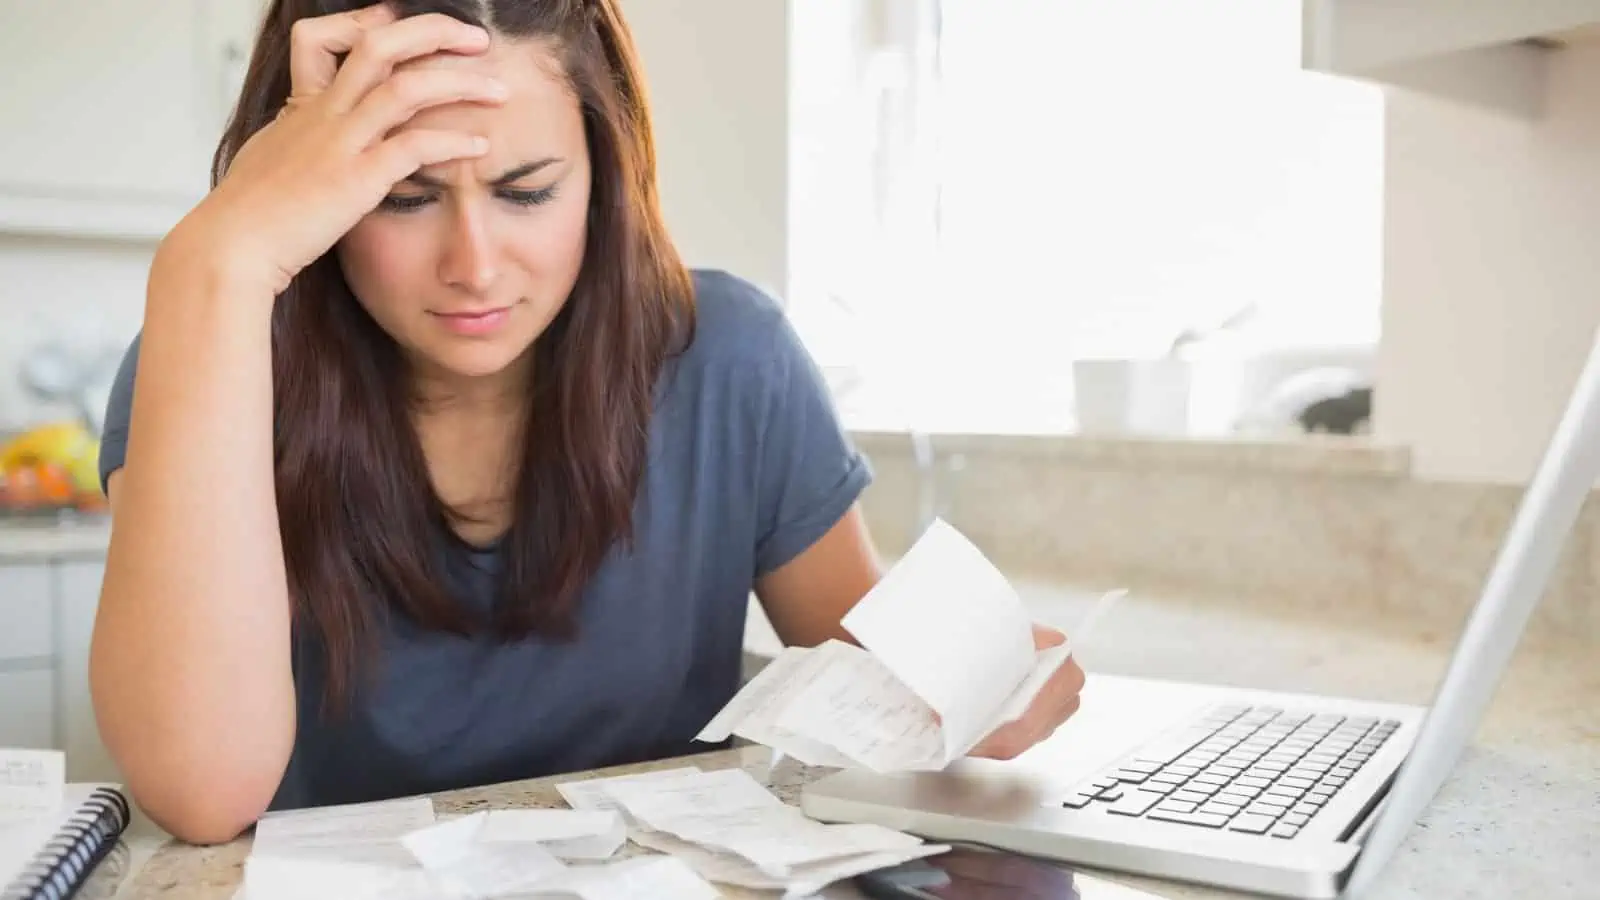 woman holding receipts with head on hand looking stressed